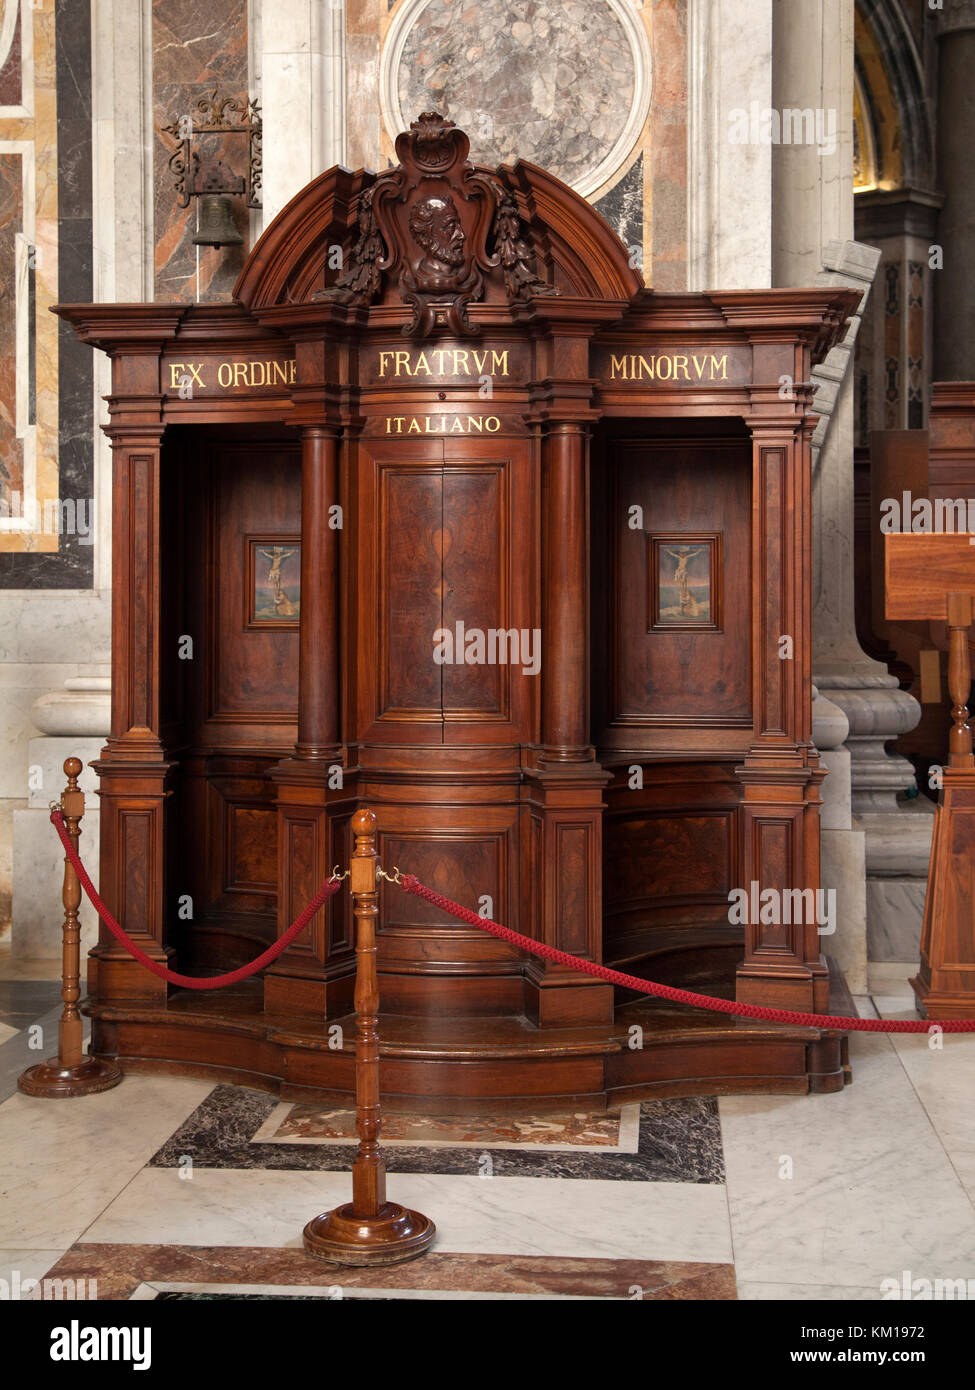 Confession Box in St. Peter's Basilica at the Vatican City, Rome, Italy Stock Photo